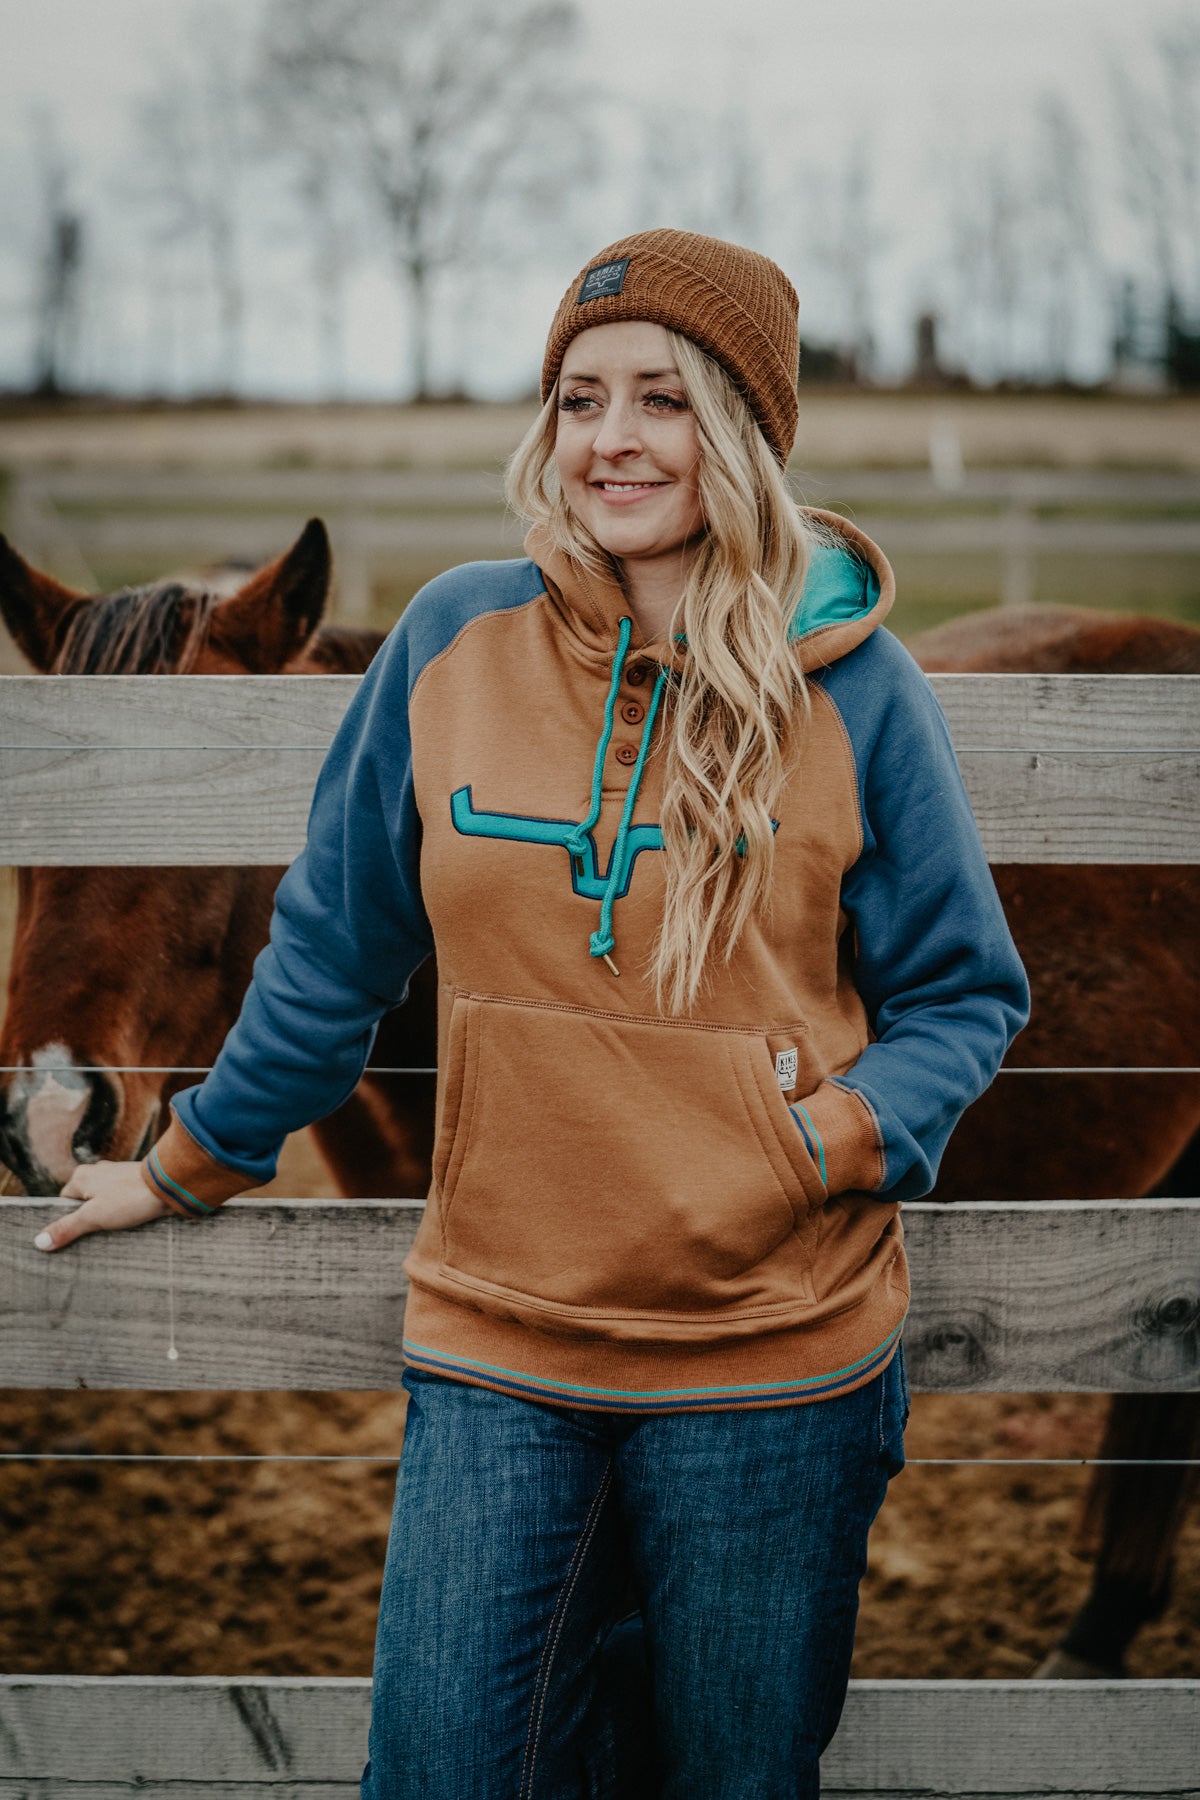 Image of 'Amigo' Women's Hoodie by Kimes Ranch (Brown & Teal)